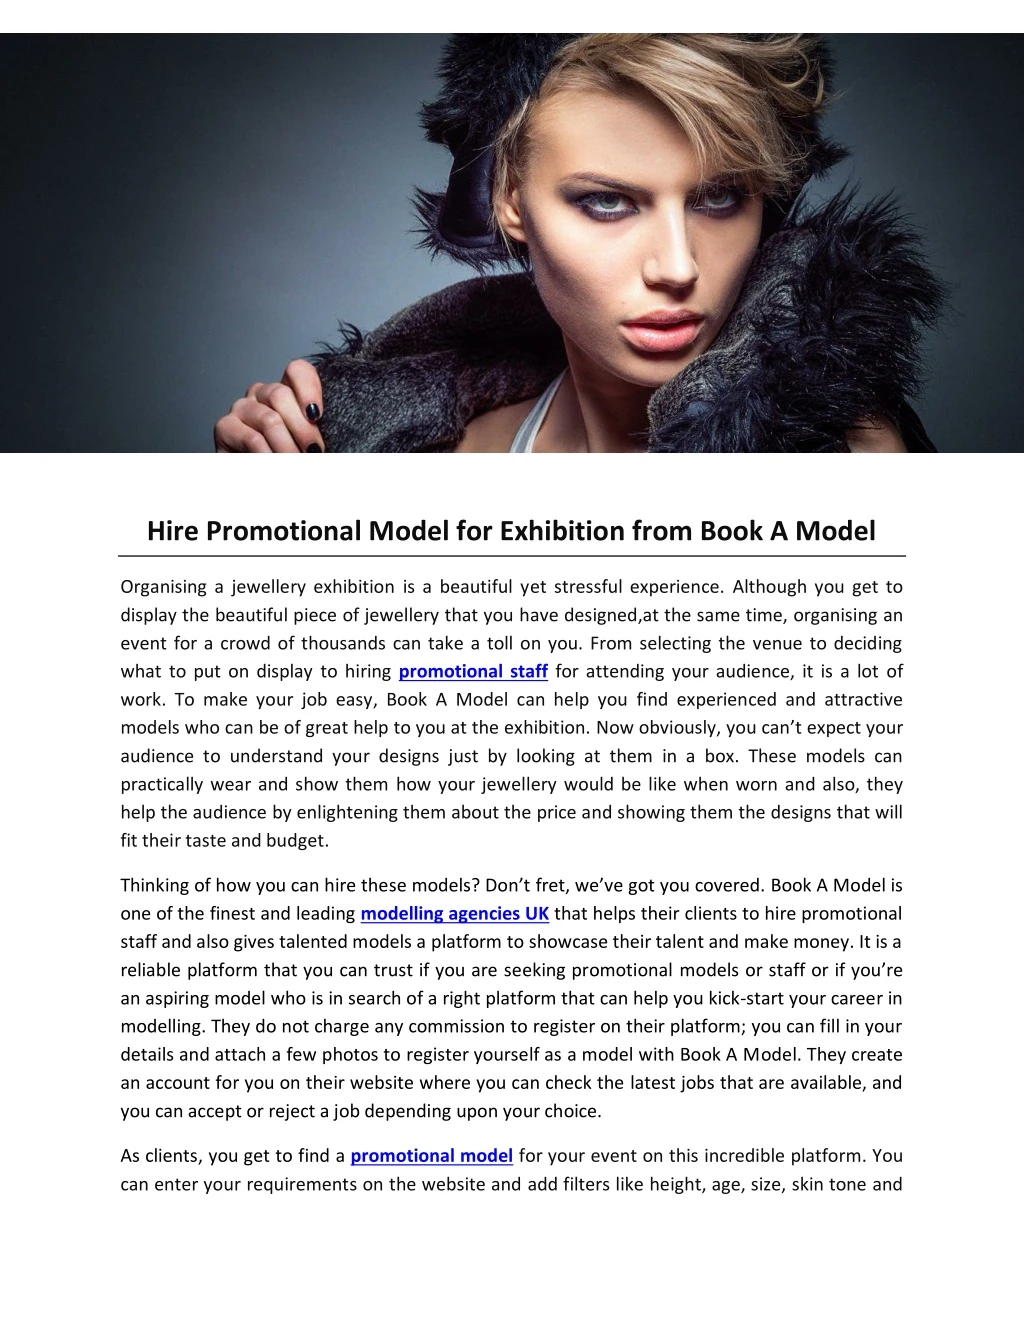 hire promotional model for exhibition from book